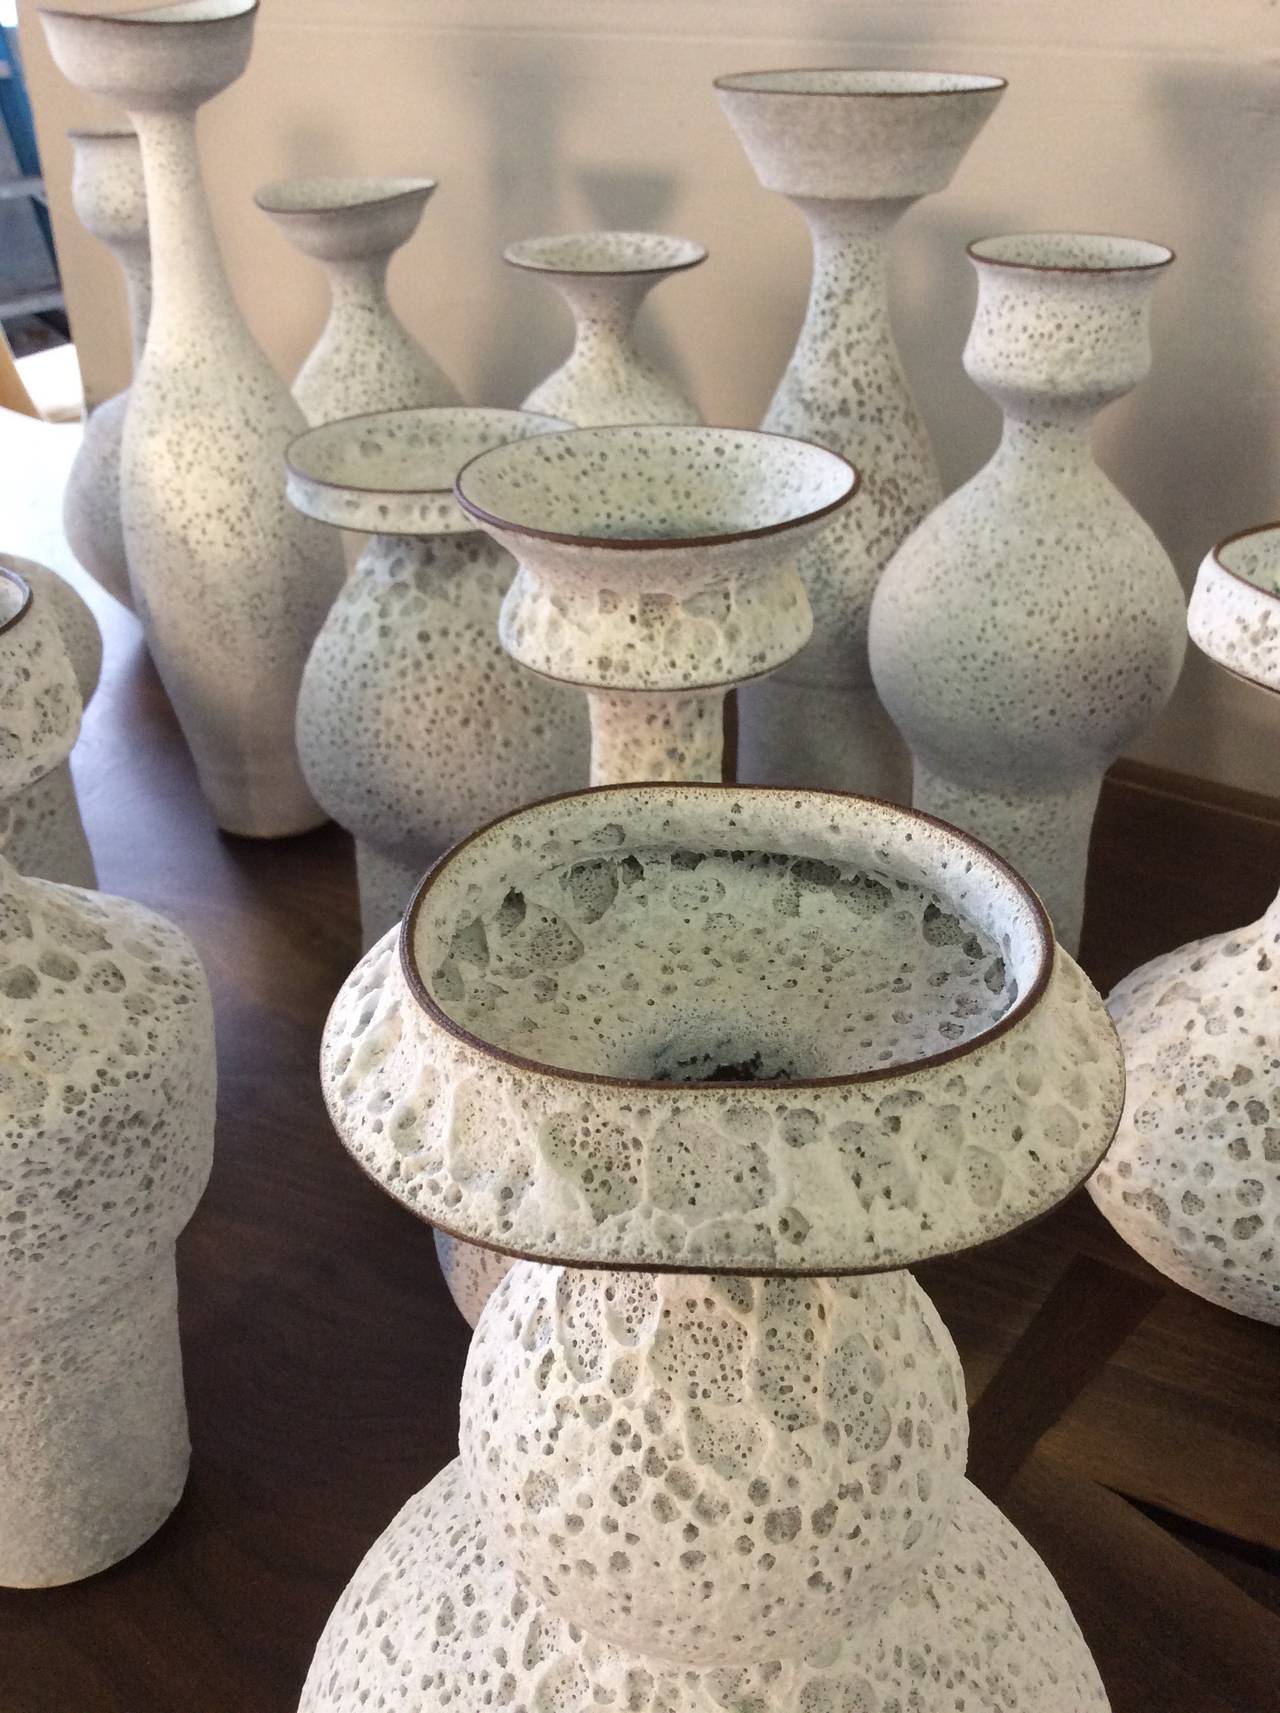 Contemporary Masterful Studio Pottery Vases in a White Crater Glaze by Jeremy Briddell, 2015